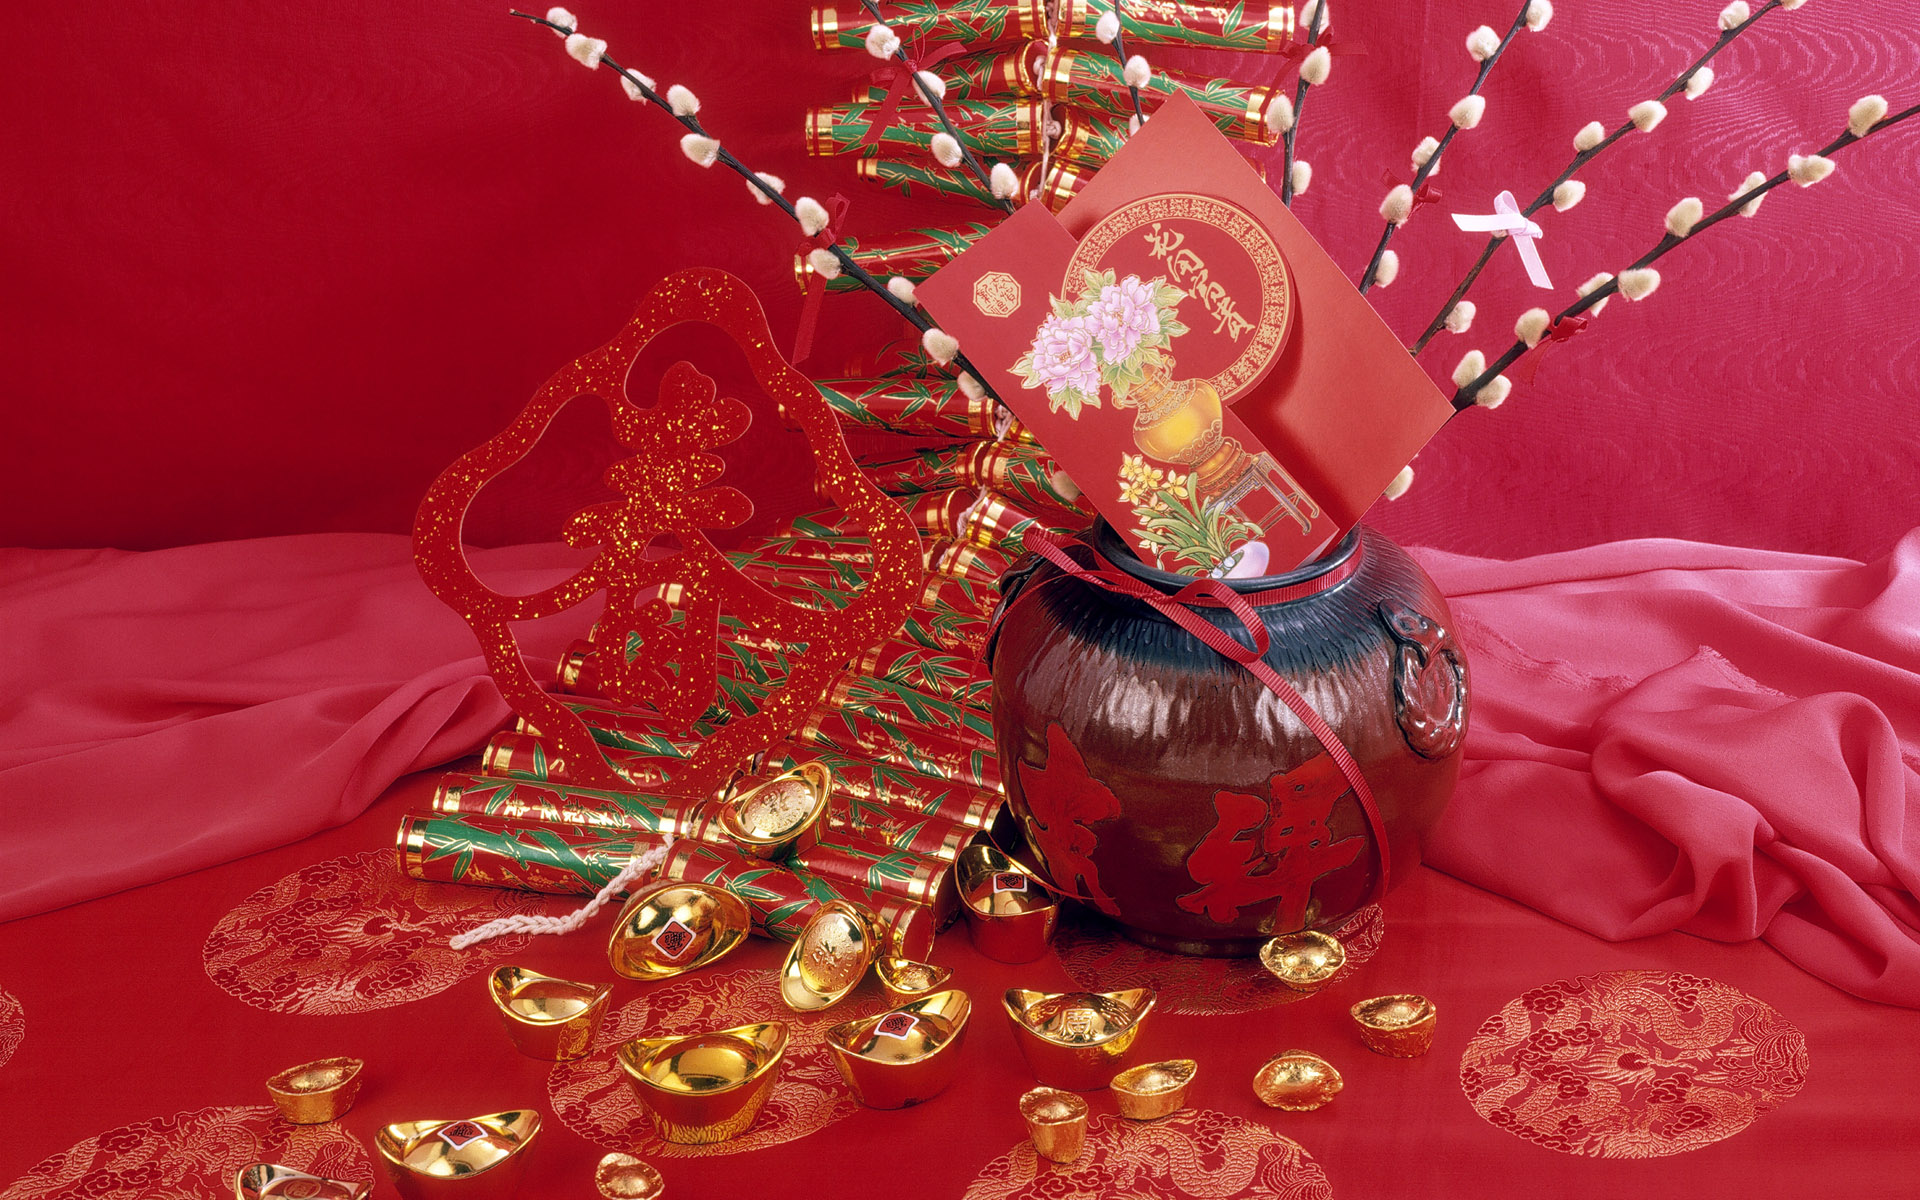 chinese new year wallpaper,red,fashion accessory,still life,centrepiece,still life photography